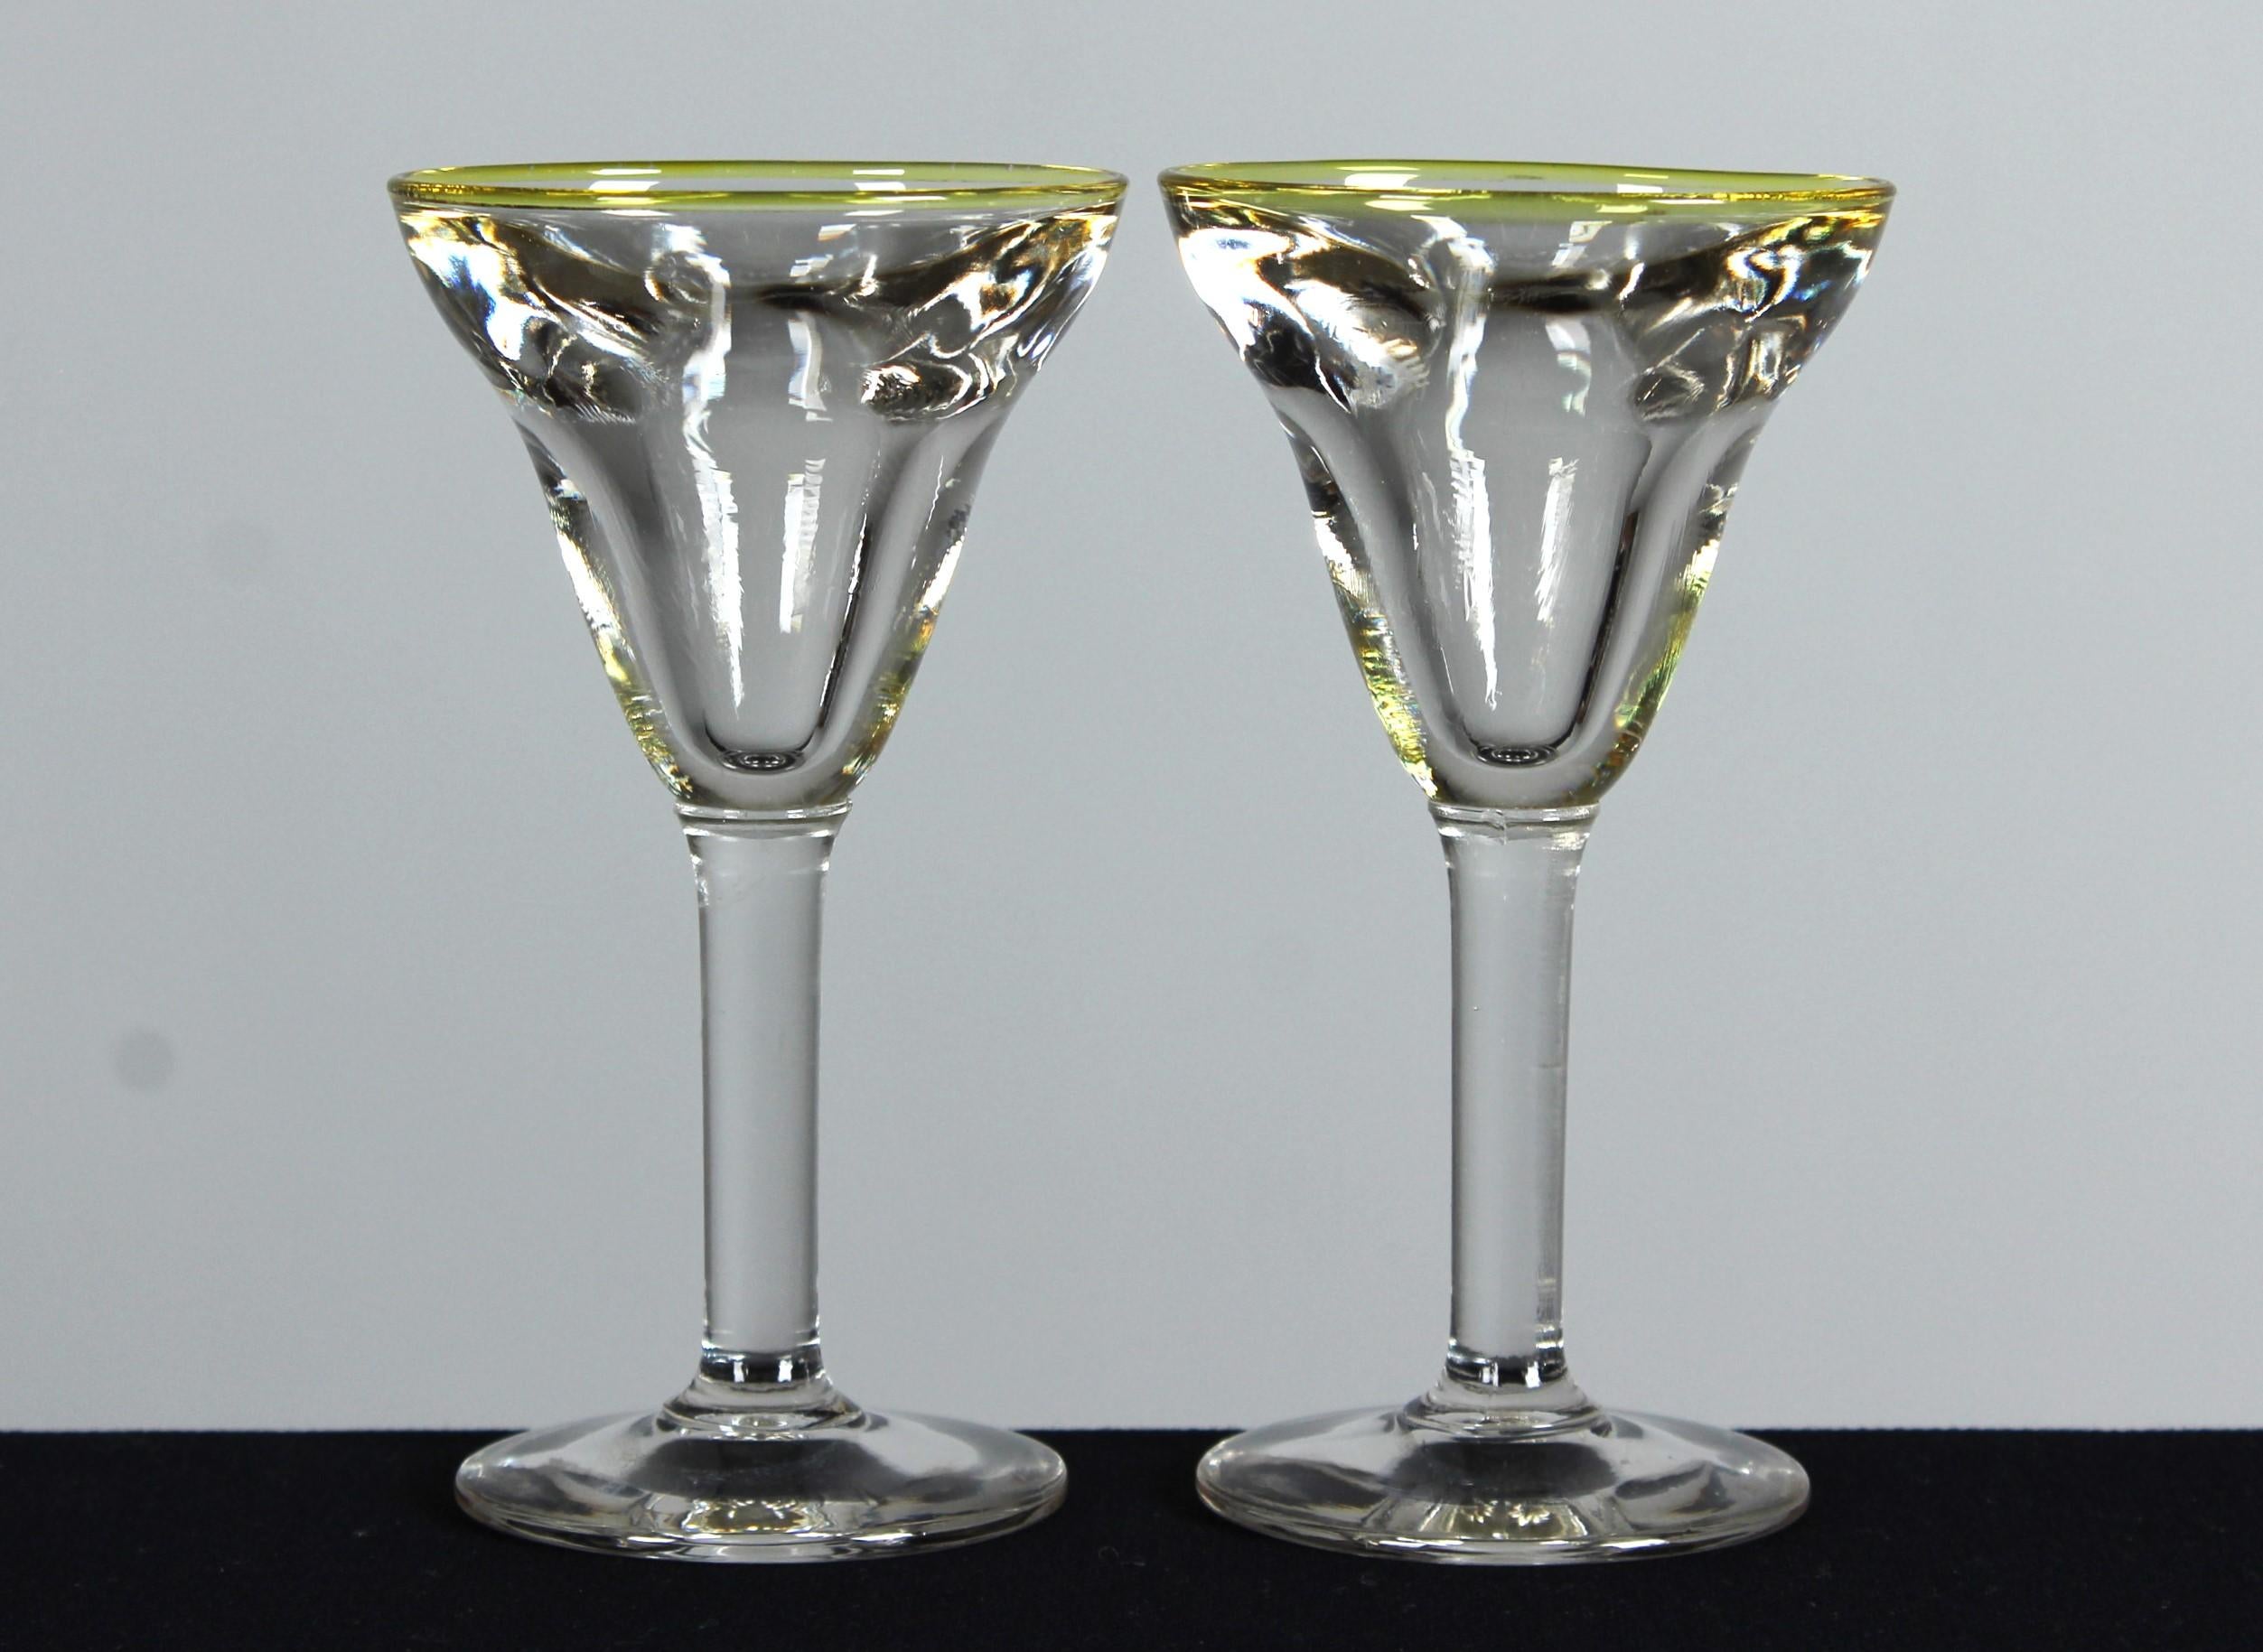 A beautiful set of two antique wine glasses, France, circa 1900.

In 19th century France, the art of glassmaking experienced a renaissance inspired by the rich history and heritage of ancient techniques. Antique glasses from this era are not only